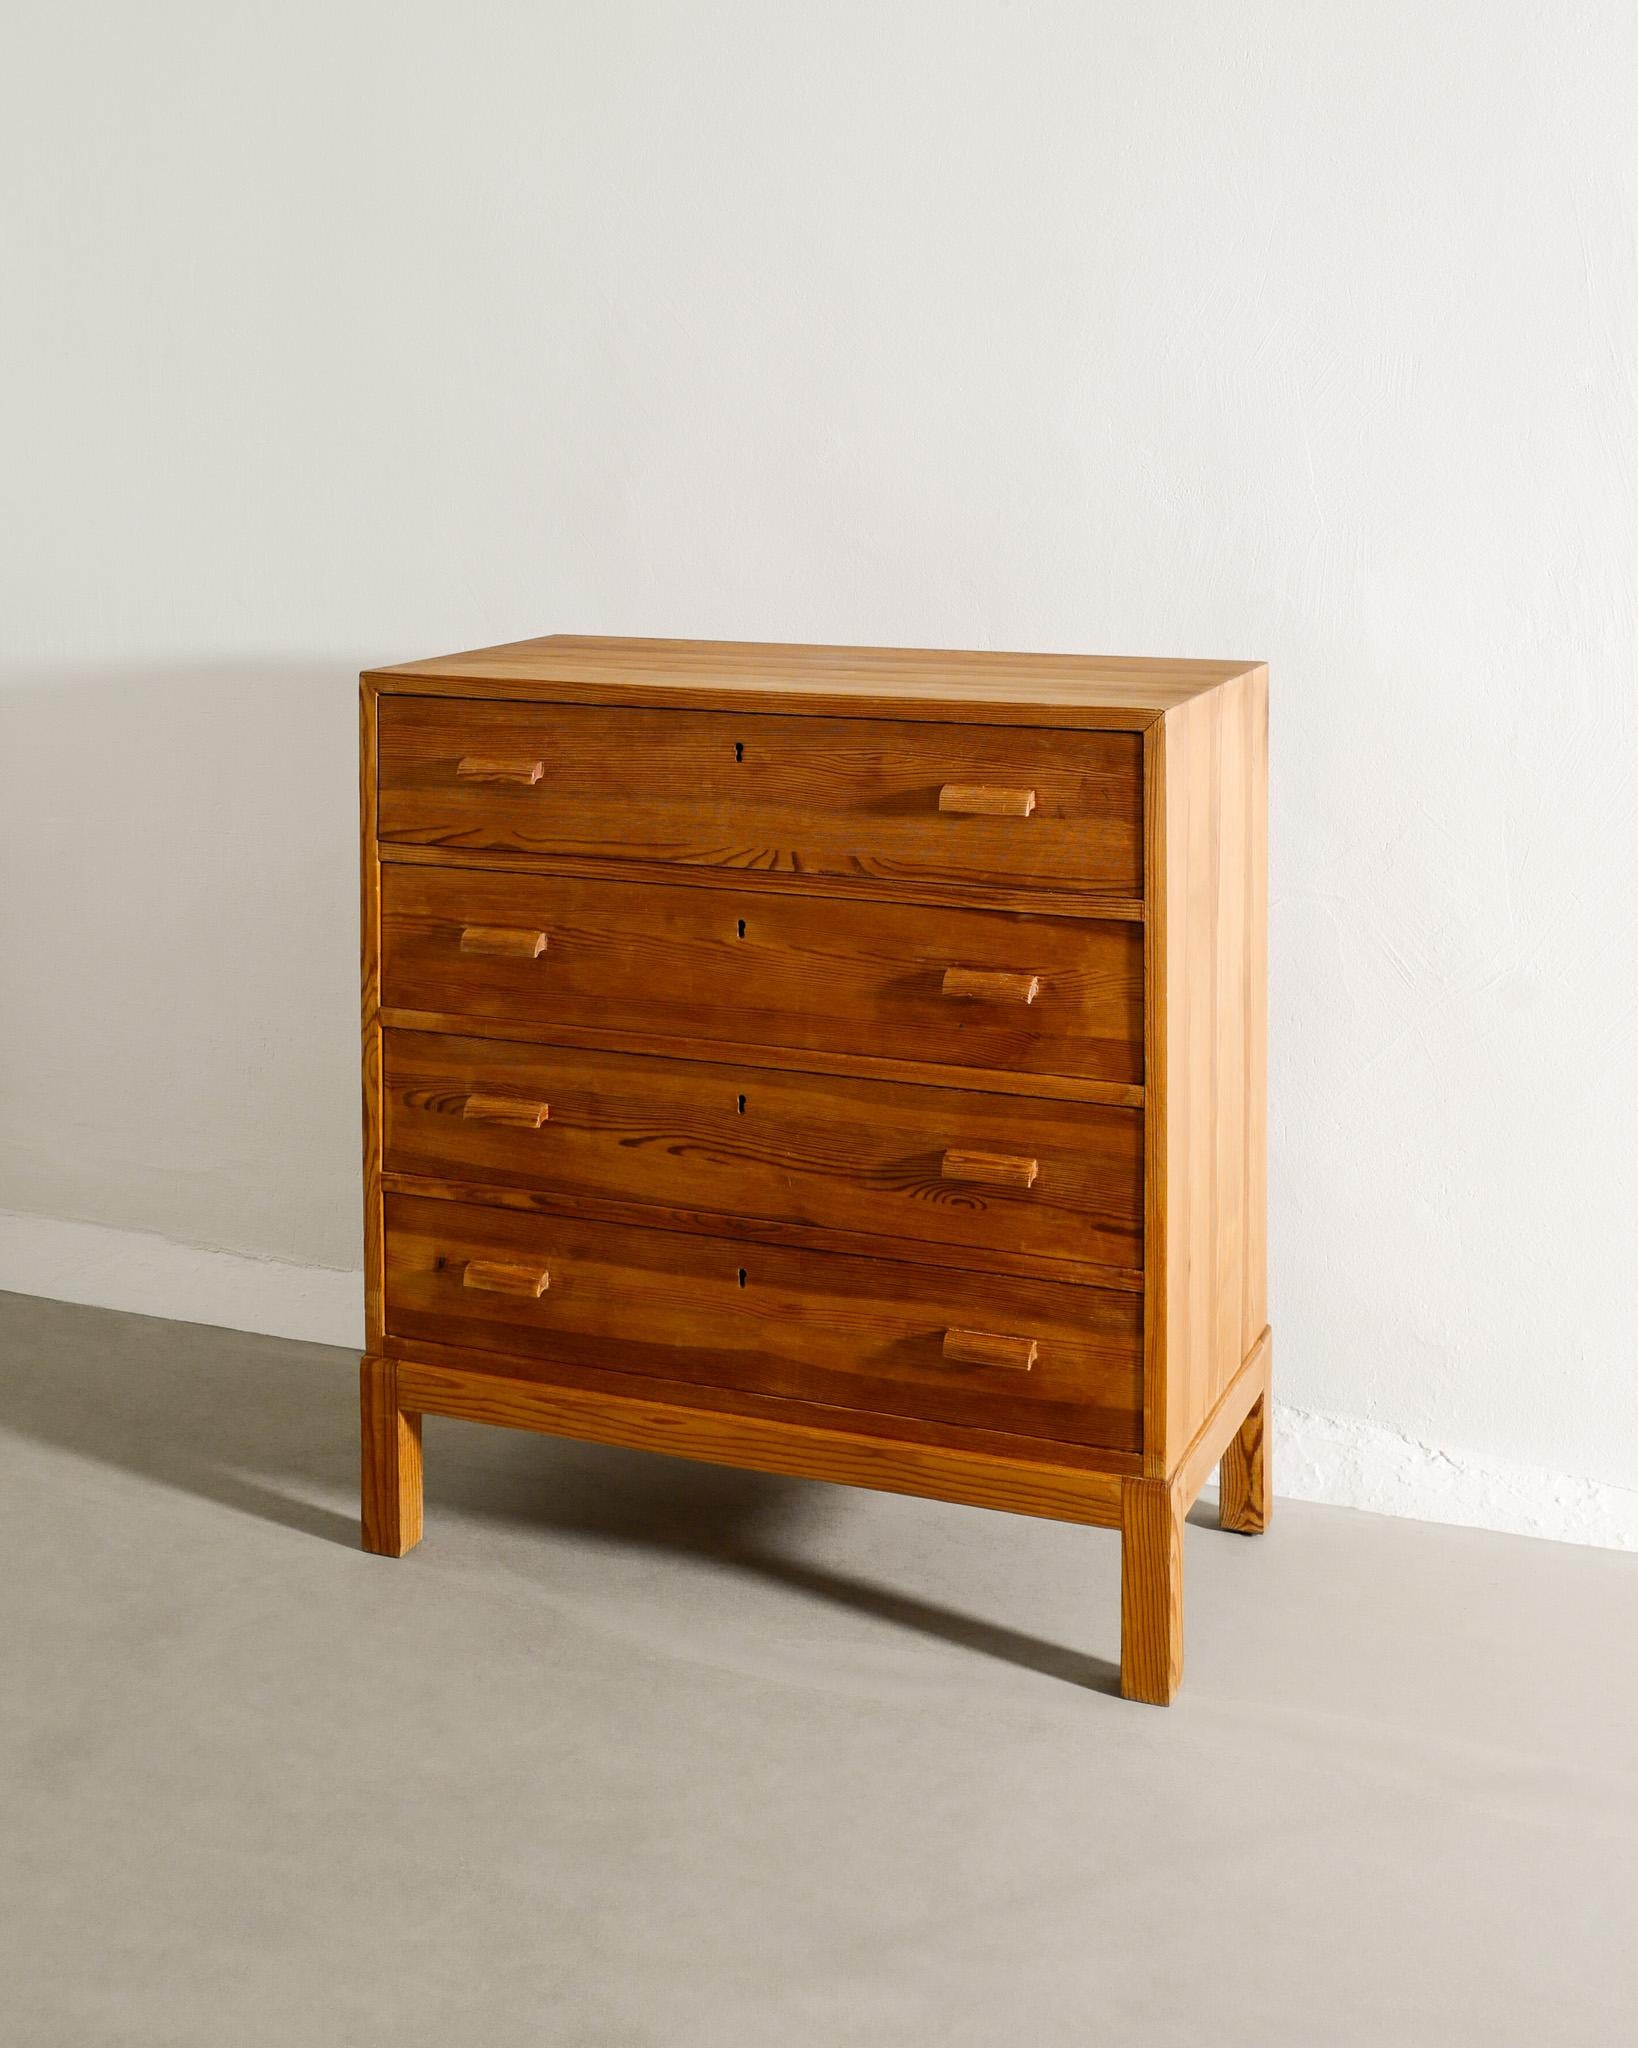 Mid-20th Century Swedish Chest of Drawers in Pine in style of Axel Einar Hjorth Produced, 1930s 